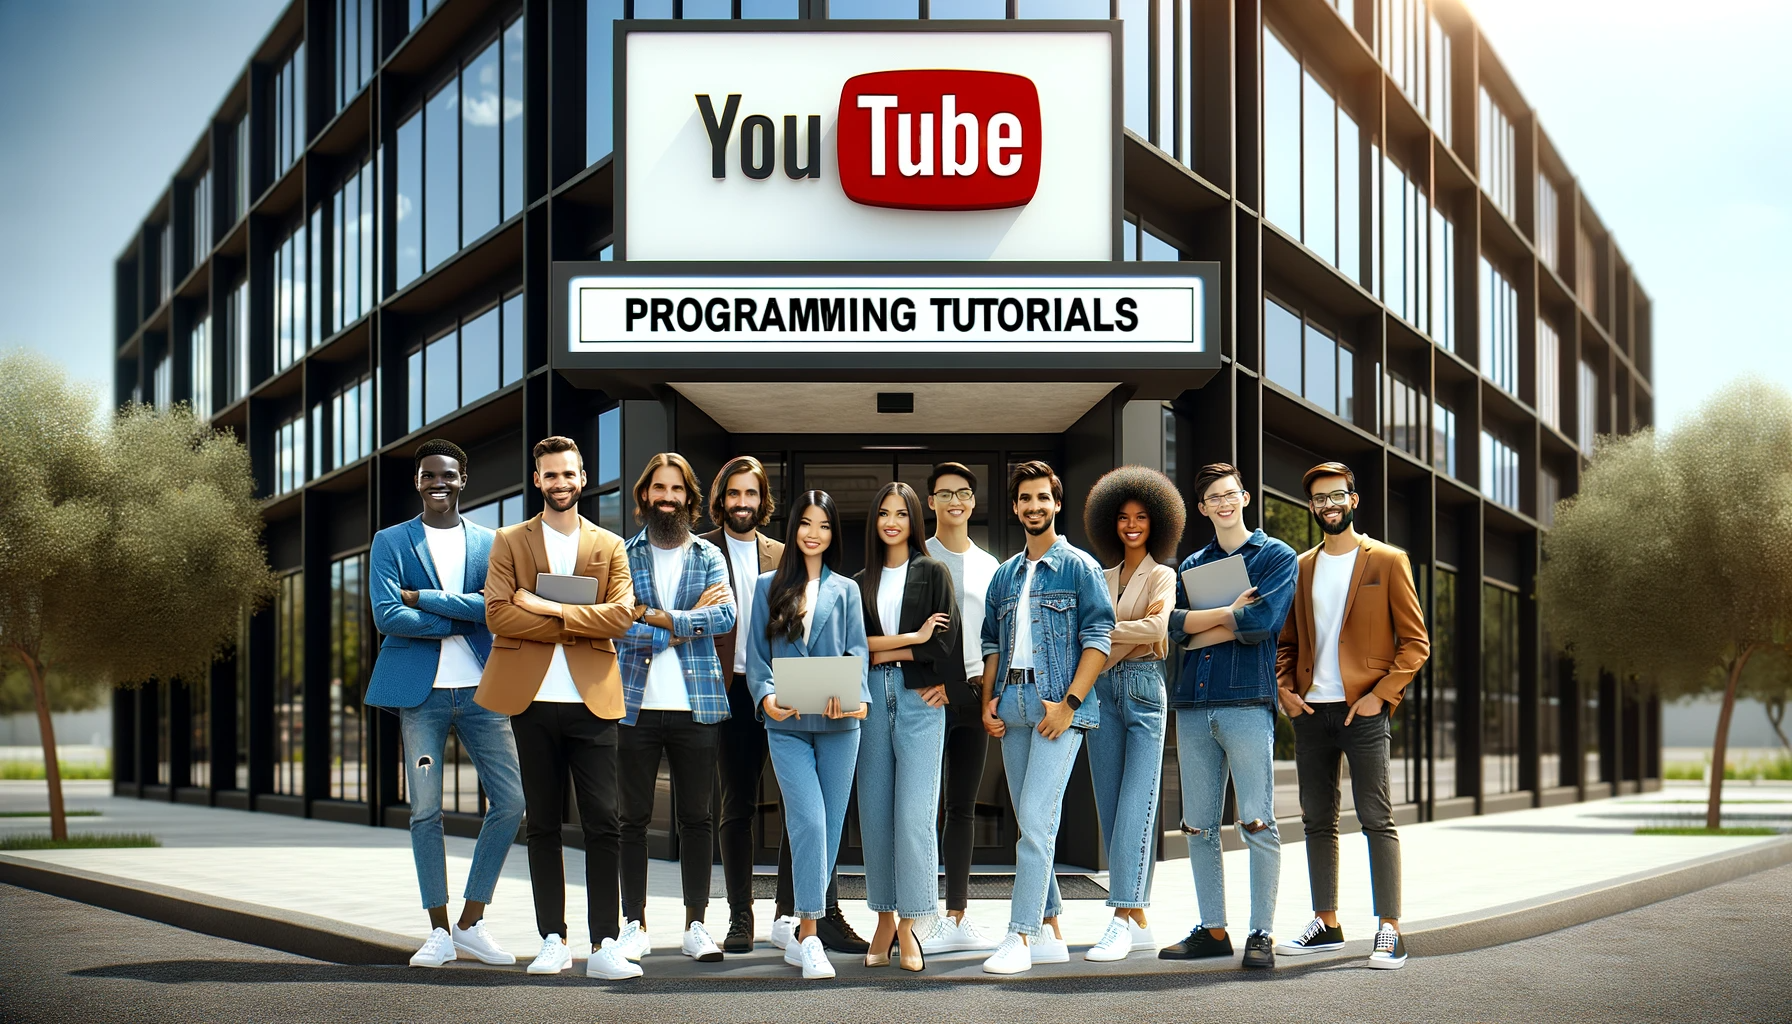 YouTube programming tutorial specialist team in front of their office building